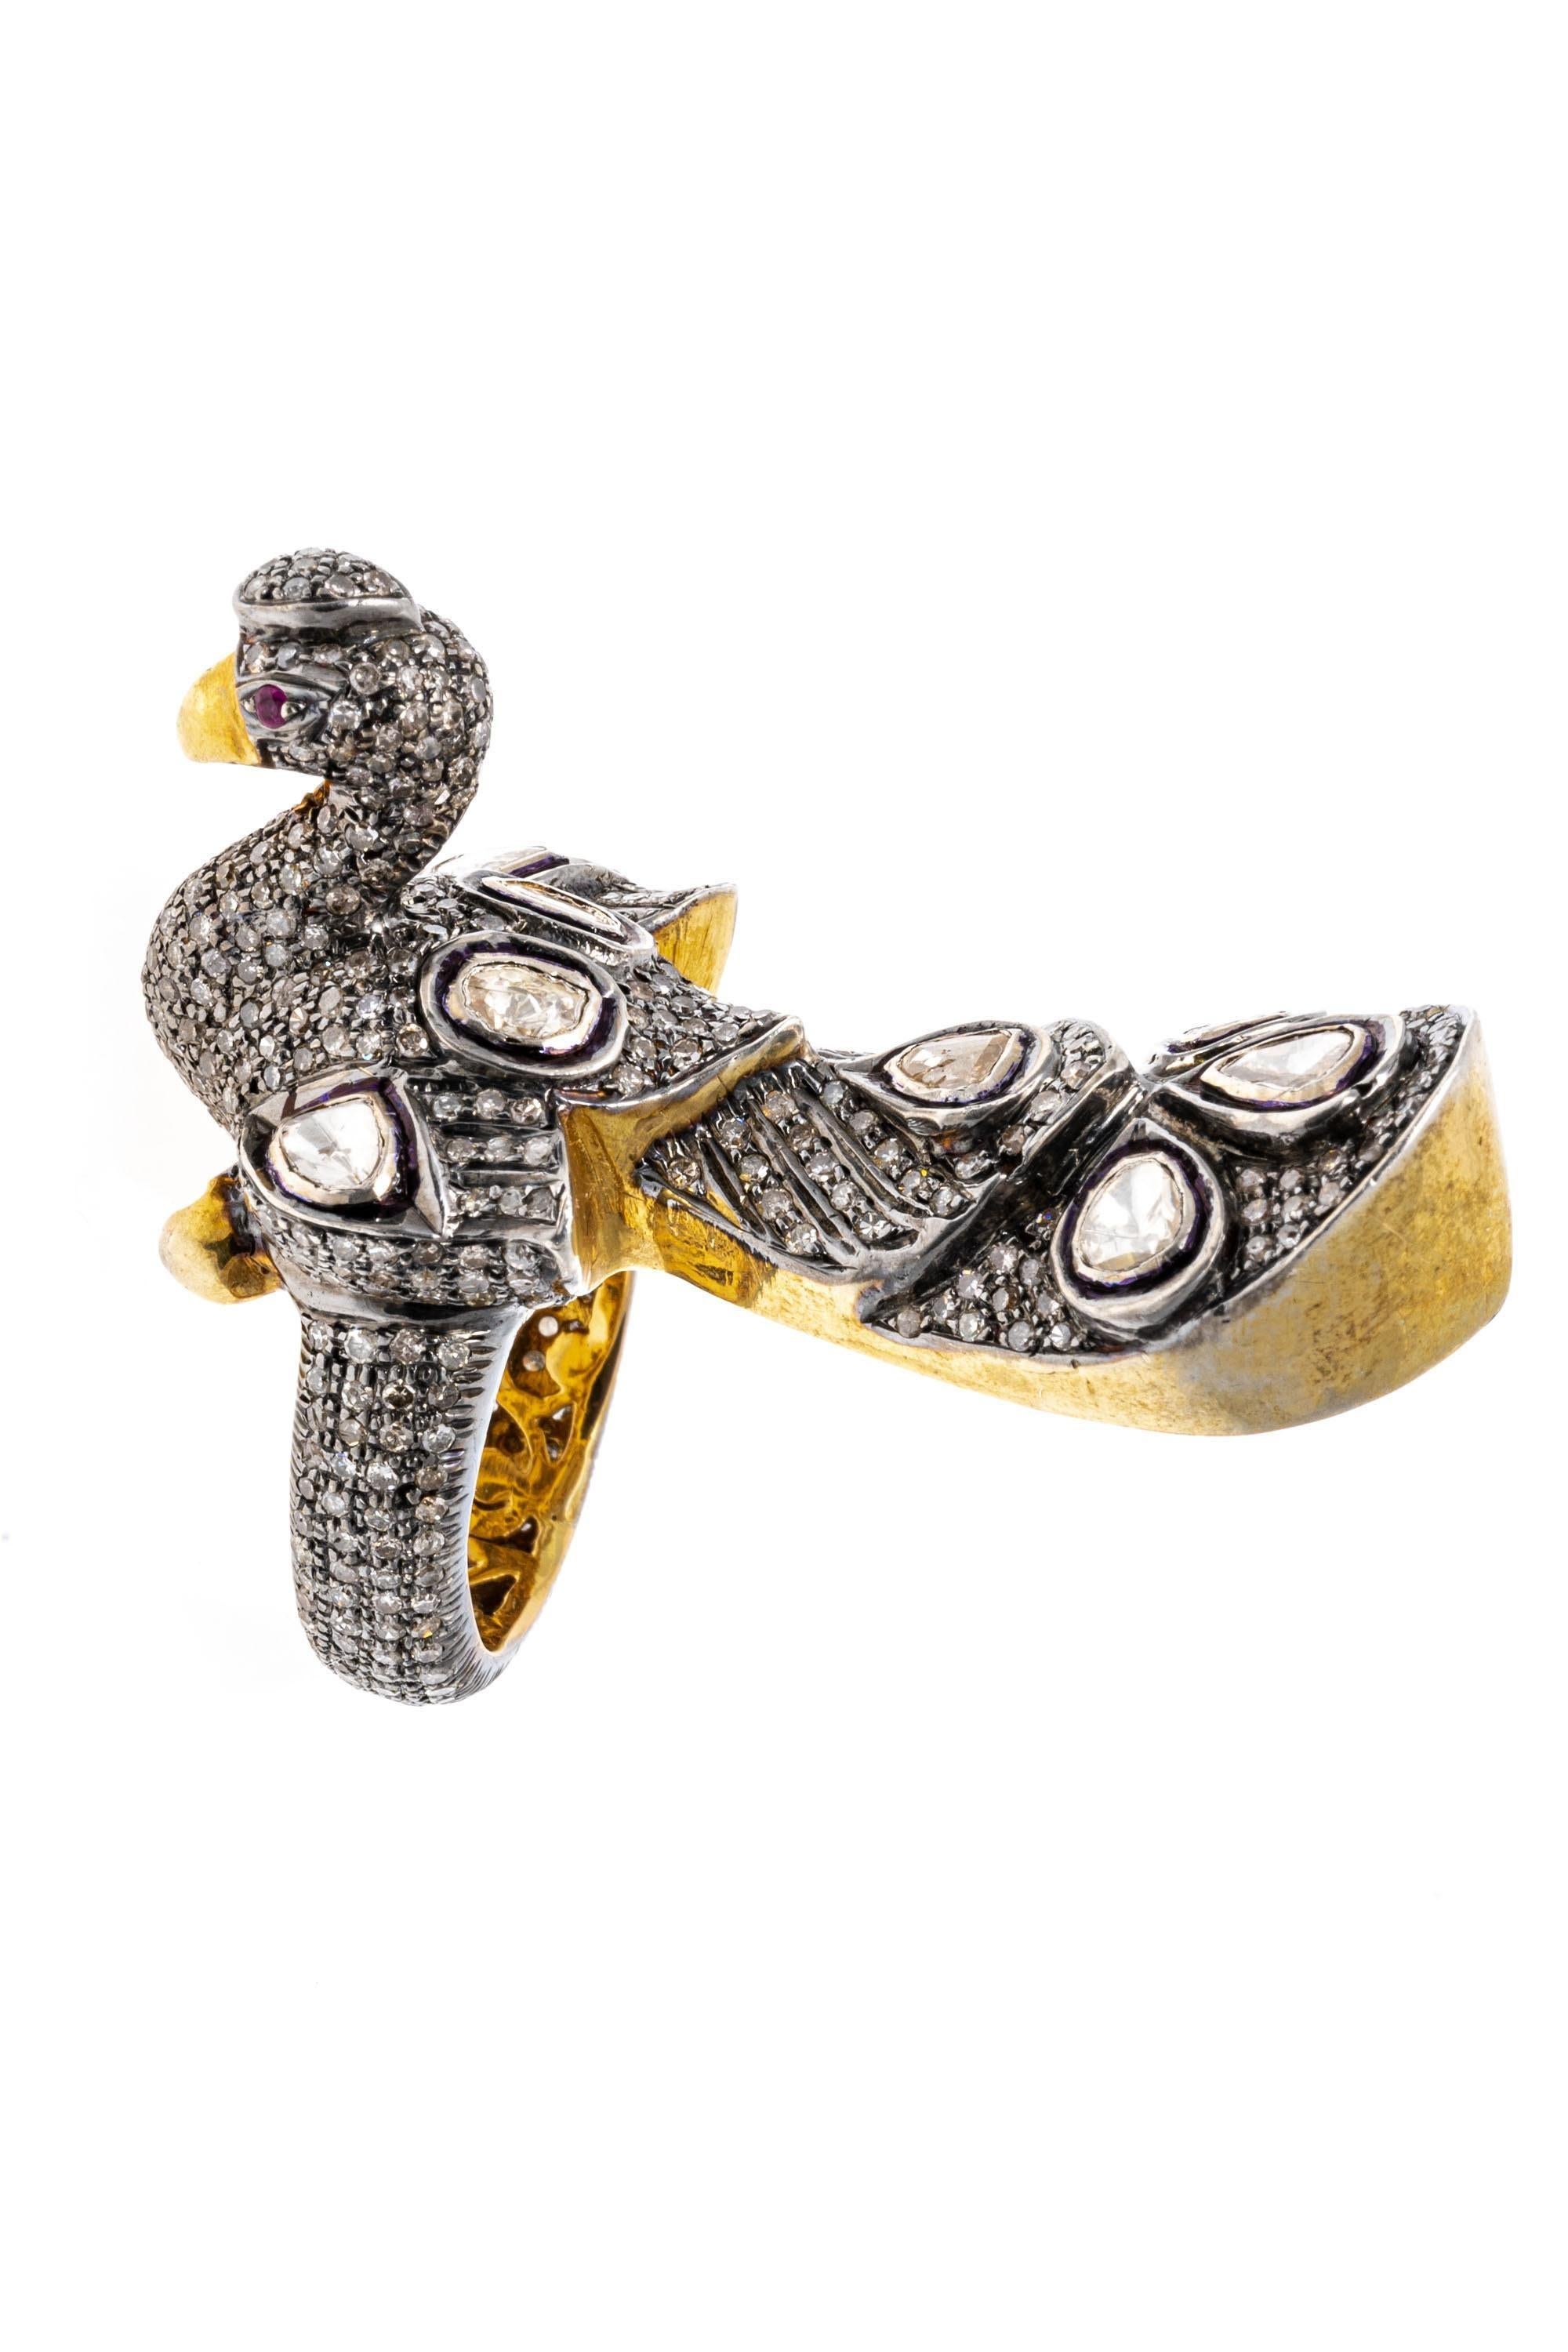 Sterling Silver Pave Set Diamond Peacock Ring, App. 2.58 TCW For Sale